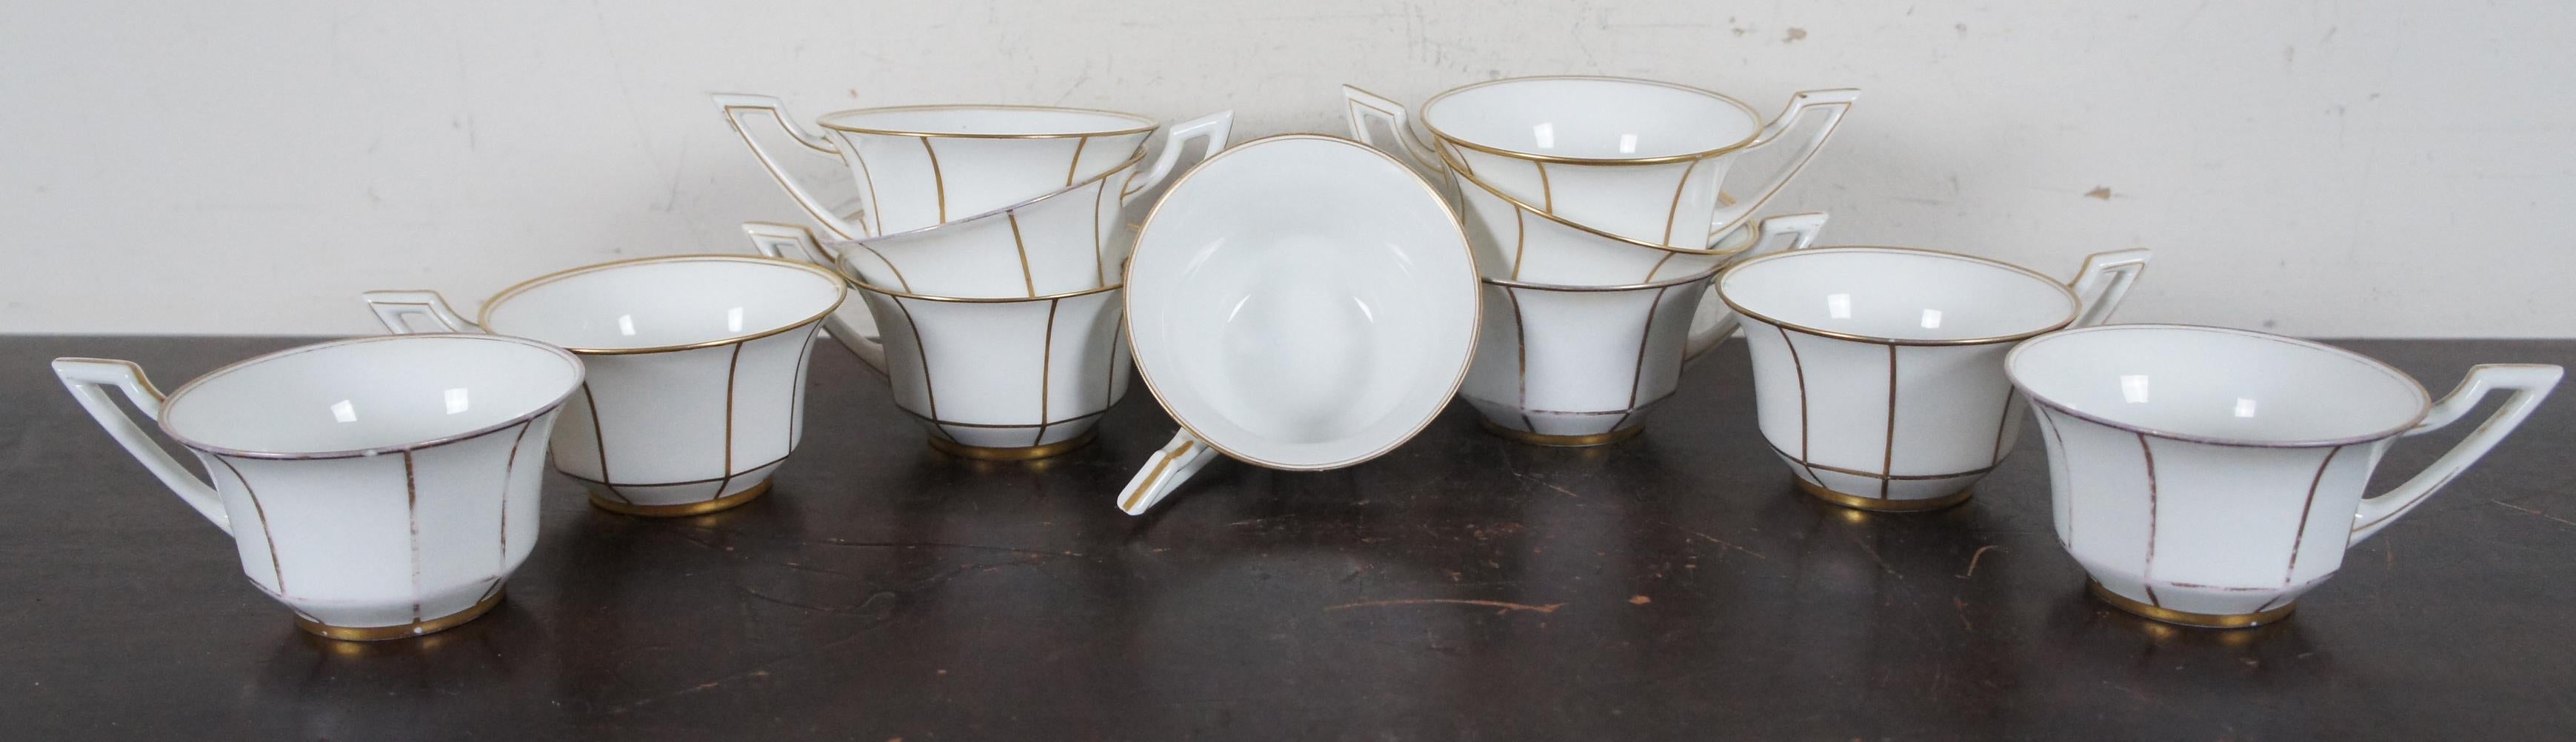 19th Century 75 Antique French Jean Pouyat Limoges Porcelain China Dinner Service Set POY254